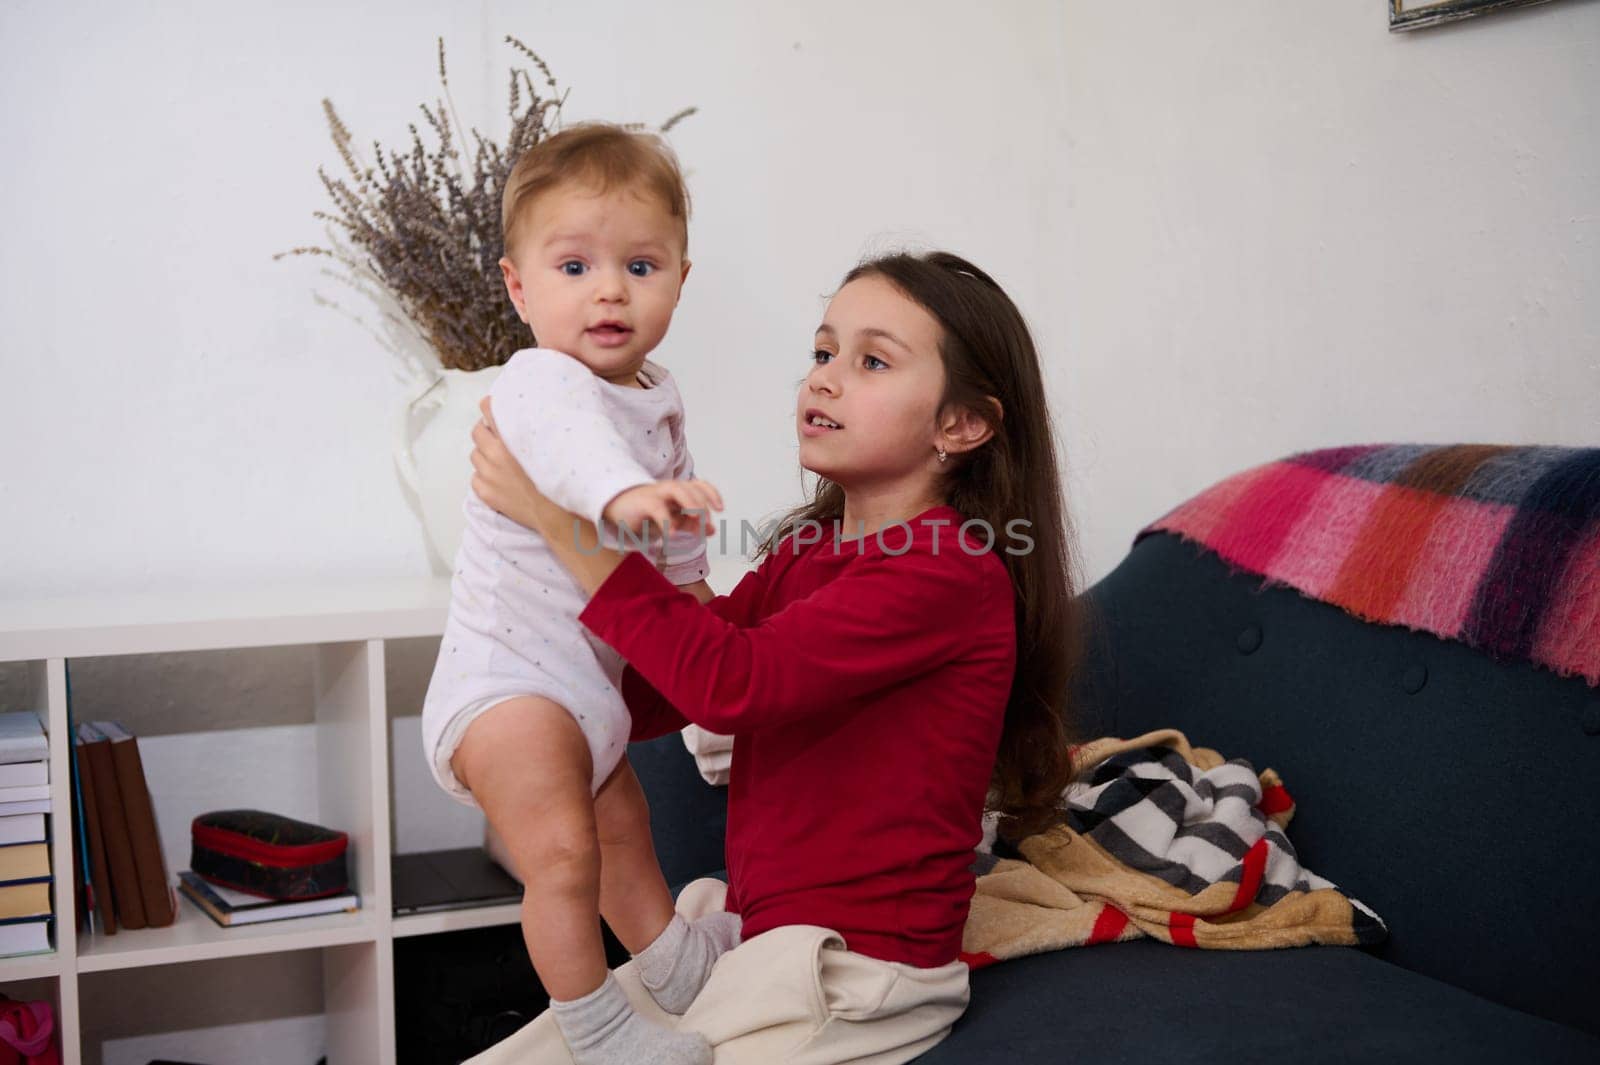 Cute sister holding her brother, an adorable baby boy on white bodysuit, playing together at home. Family relationships and love concept. Little child girl 6 years old helps her mom with a baby boy by artgf